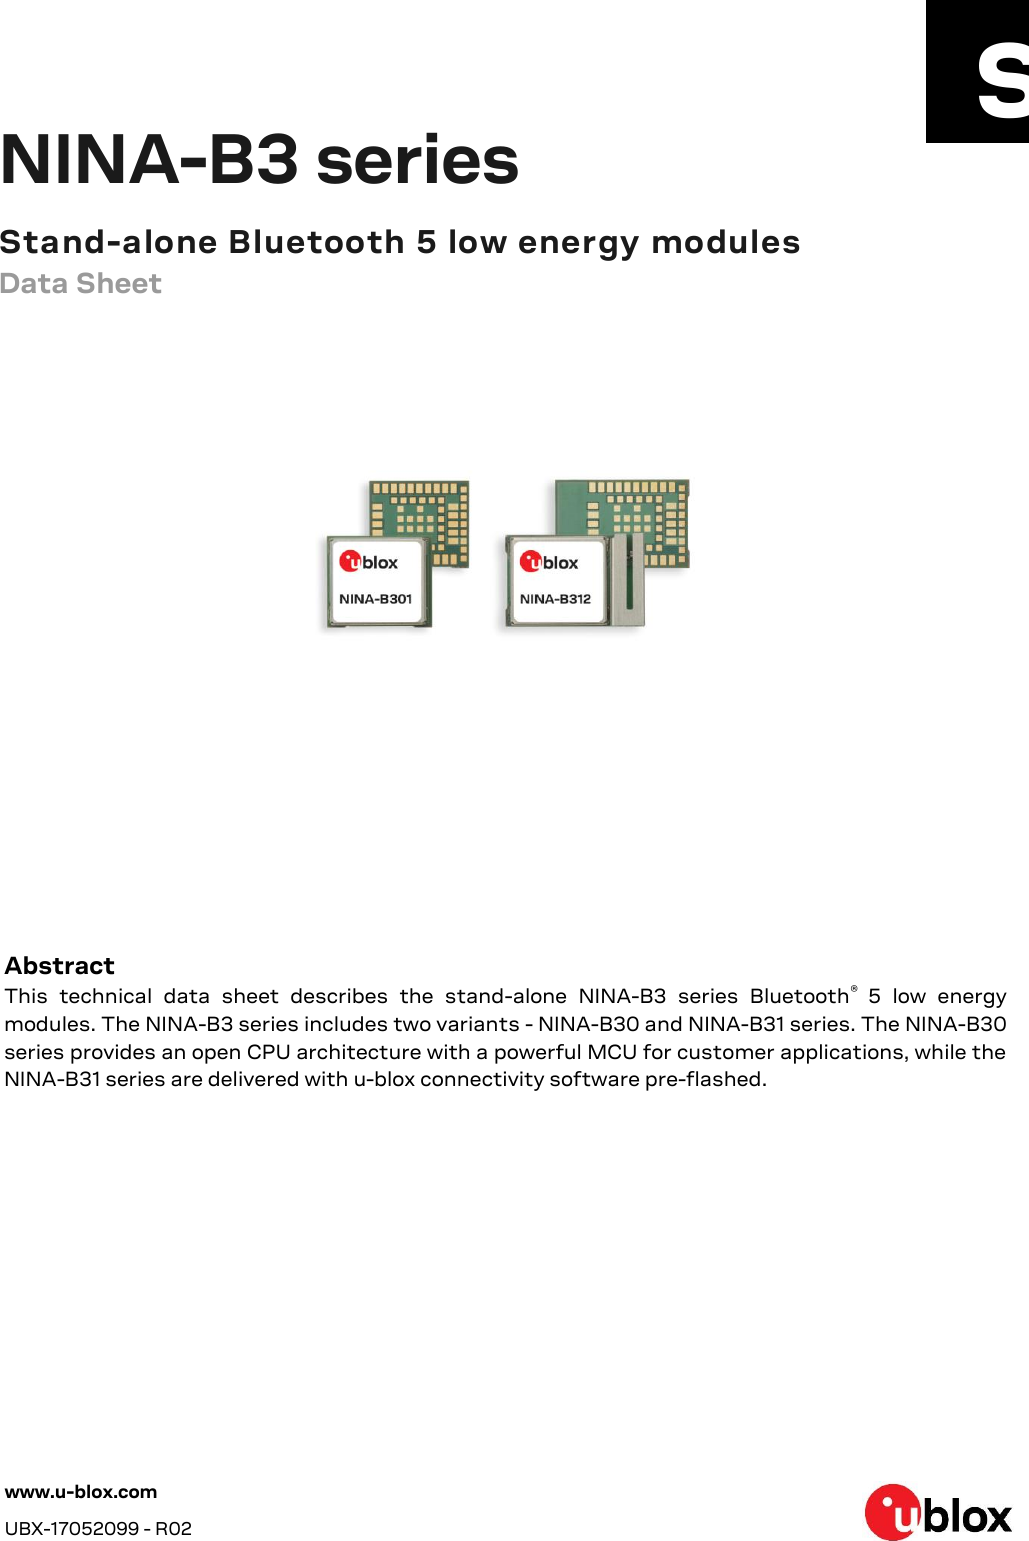  NINA-B3 series Stand-alone Bluetooth 5 low energy modules Data Sheet         Abstract This  technical  data  sheet  describes  the  stand-alone  NINA-B3  series  Bluetooth®  5  low  energy modules. The NINA-B3 series includes two variants - NINA-B30 and NINA-B31 series. The NINA-B30 series provides an open CPU architecture with a powerful MCU for customer applications, while the NINA-B31 series are delivered with u-blox connectivity software pre-flashed.   www.u-blox.com UBX-17052099 - R02 🆂  